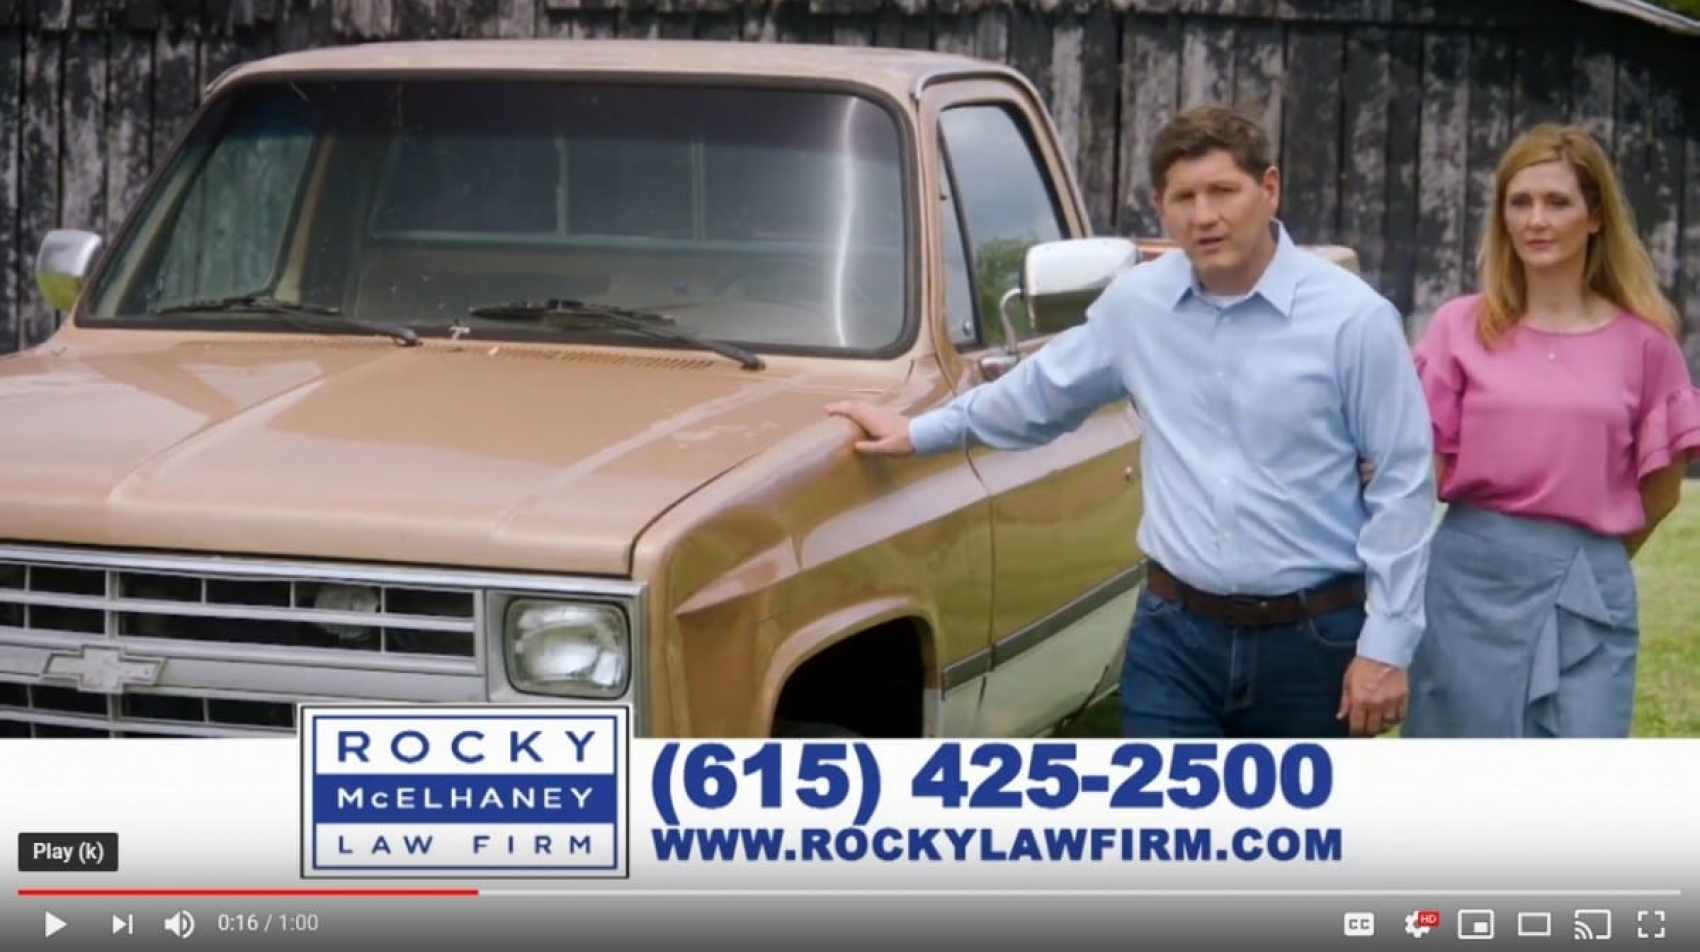 Dads Truck - Rocky McElhaney Law Firm Commercial